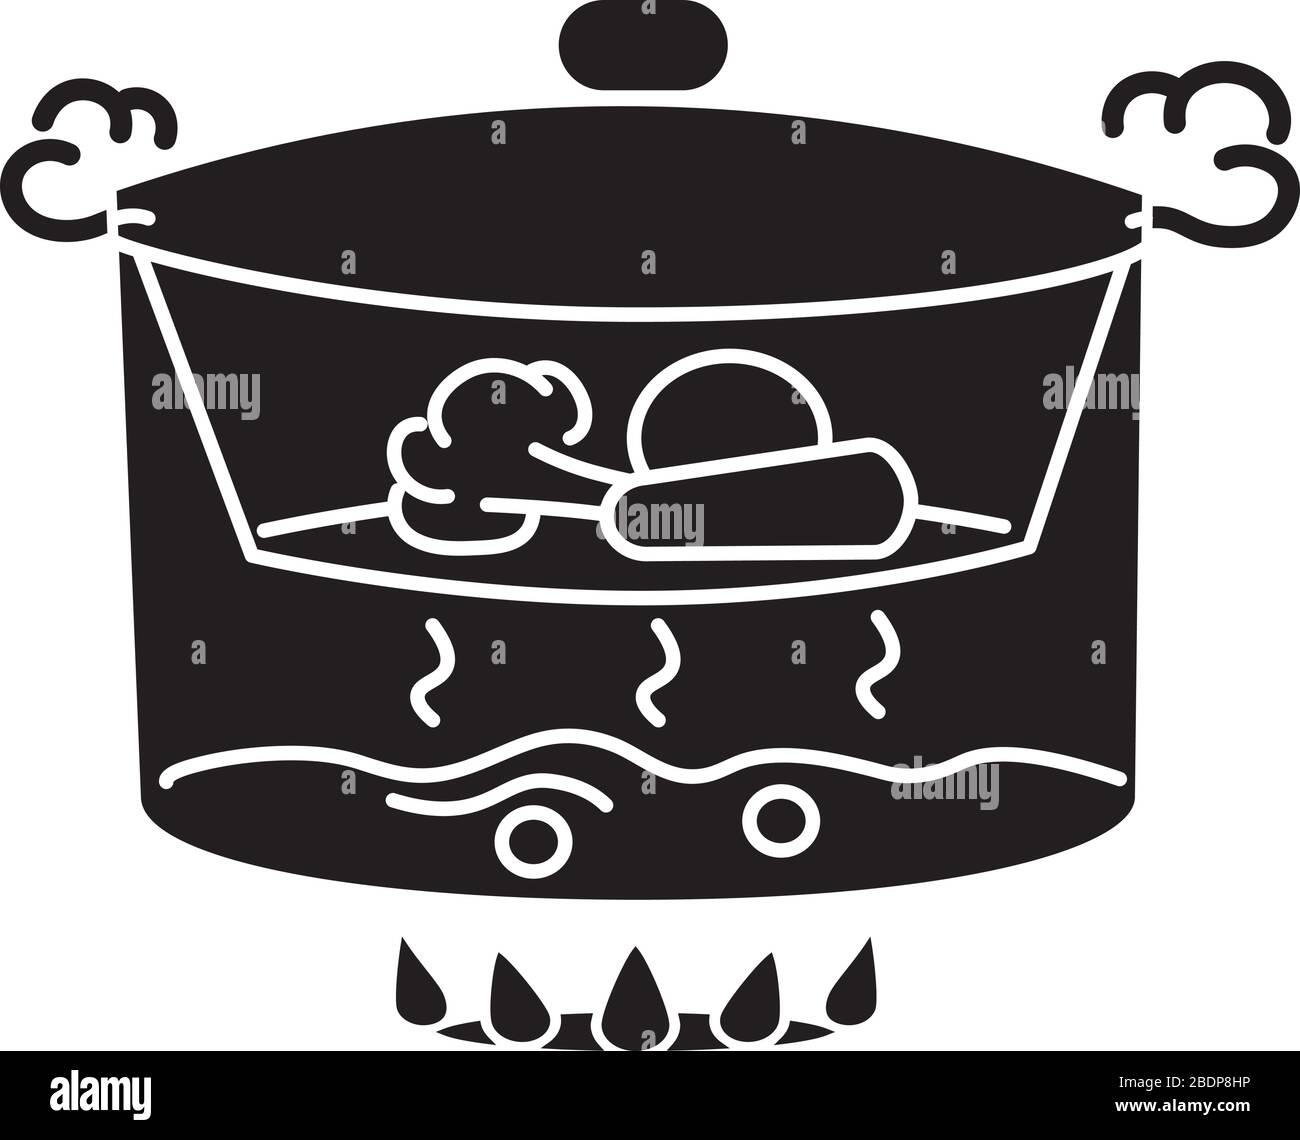 Boiling water Stock Vector Images - Alamy